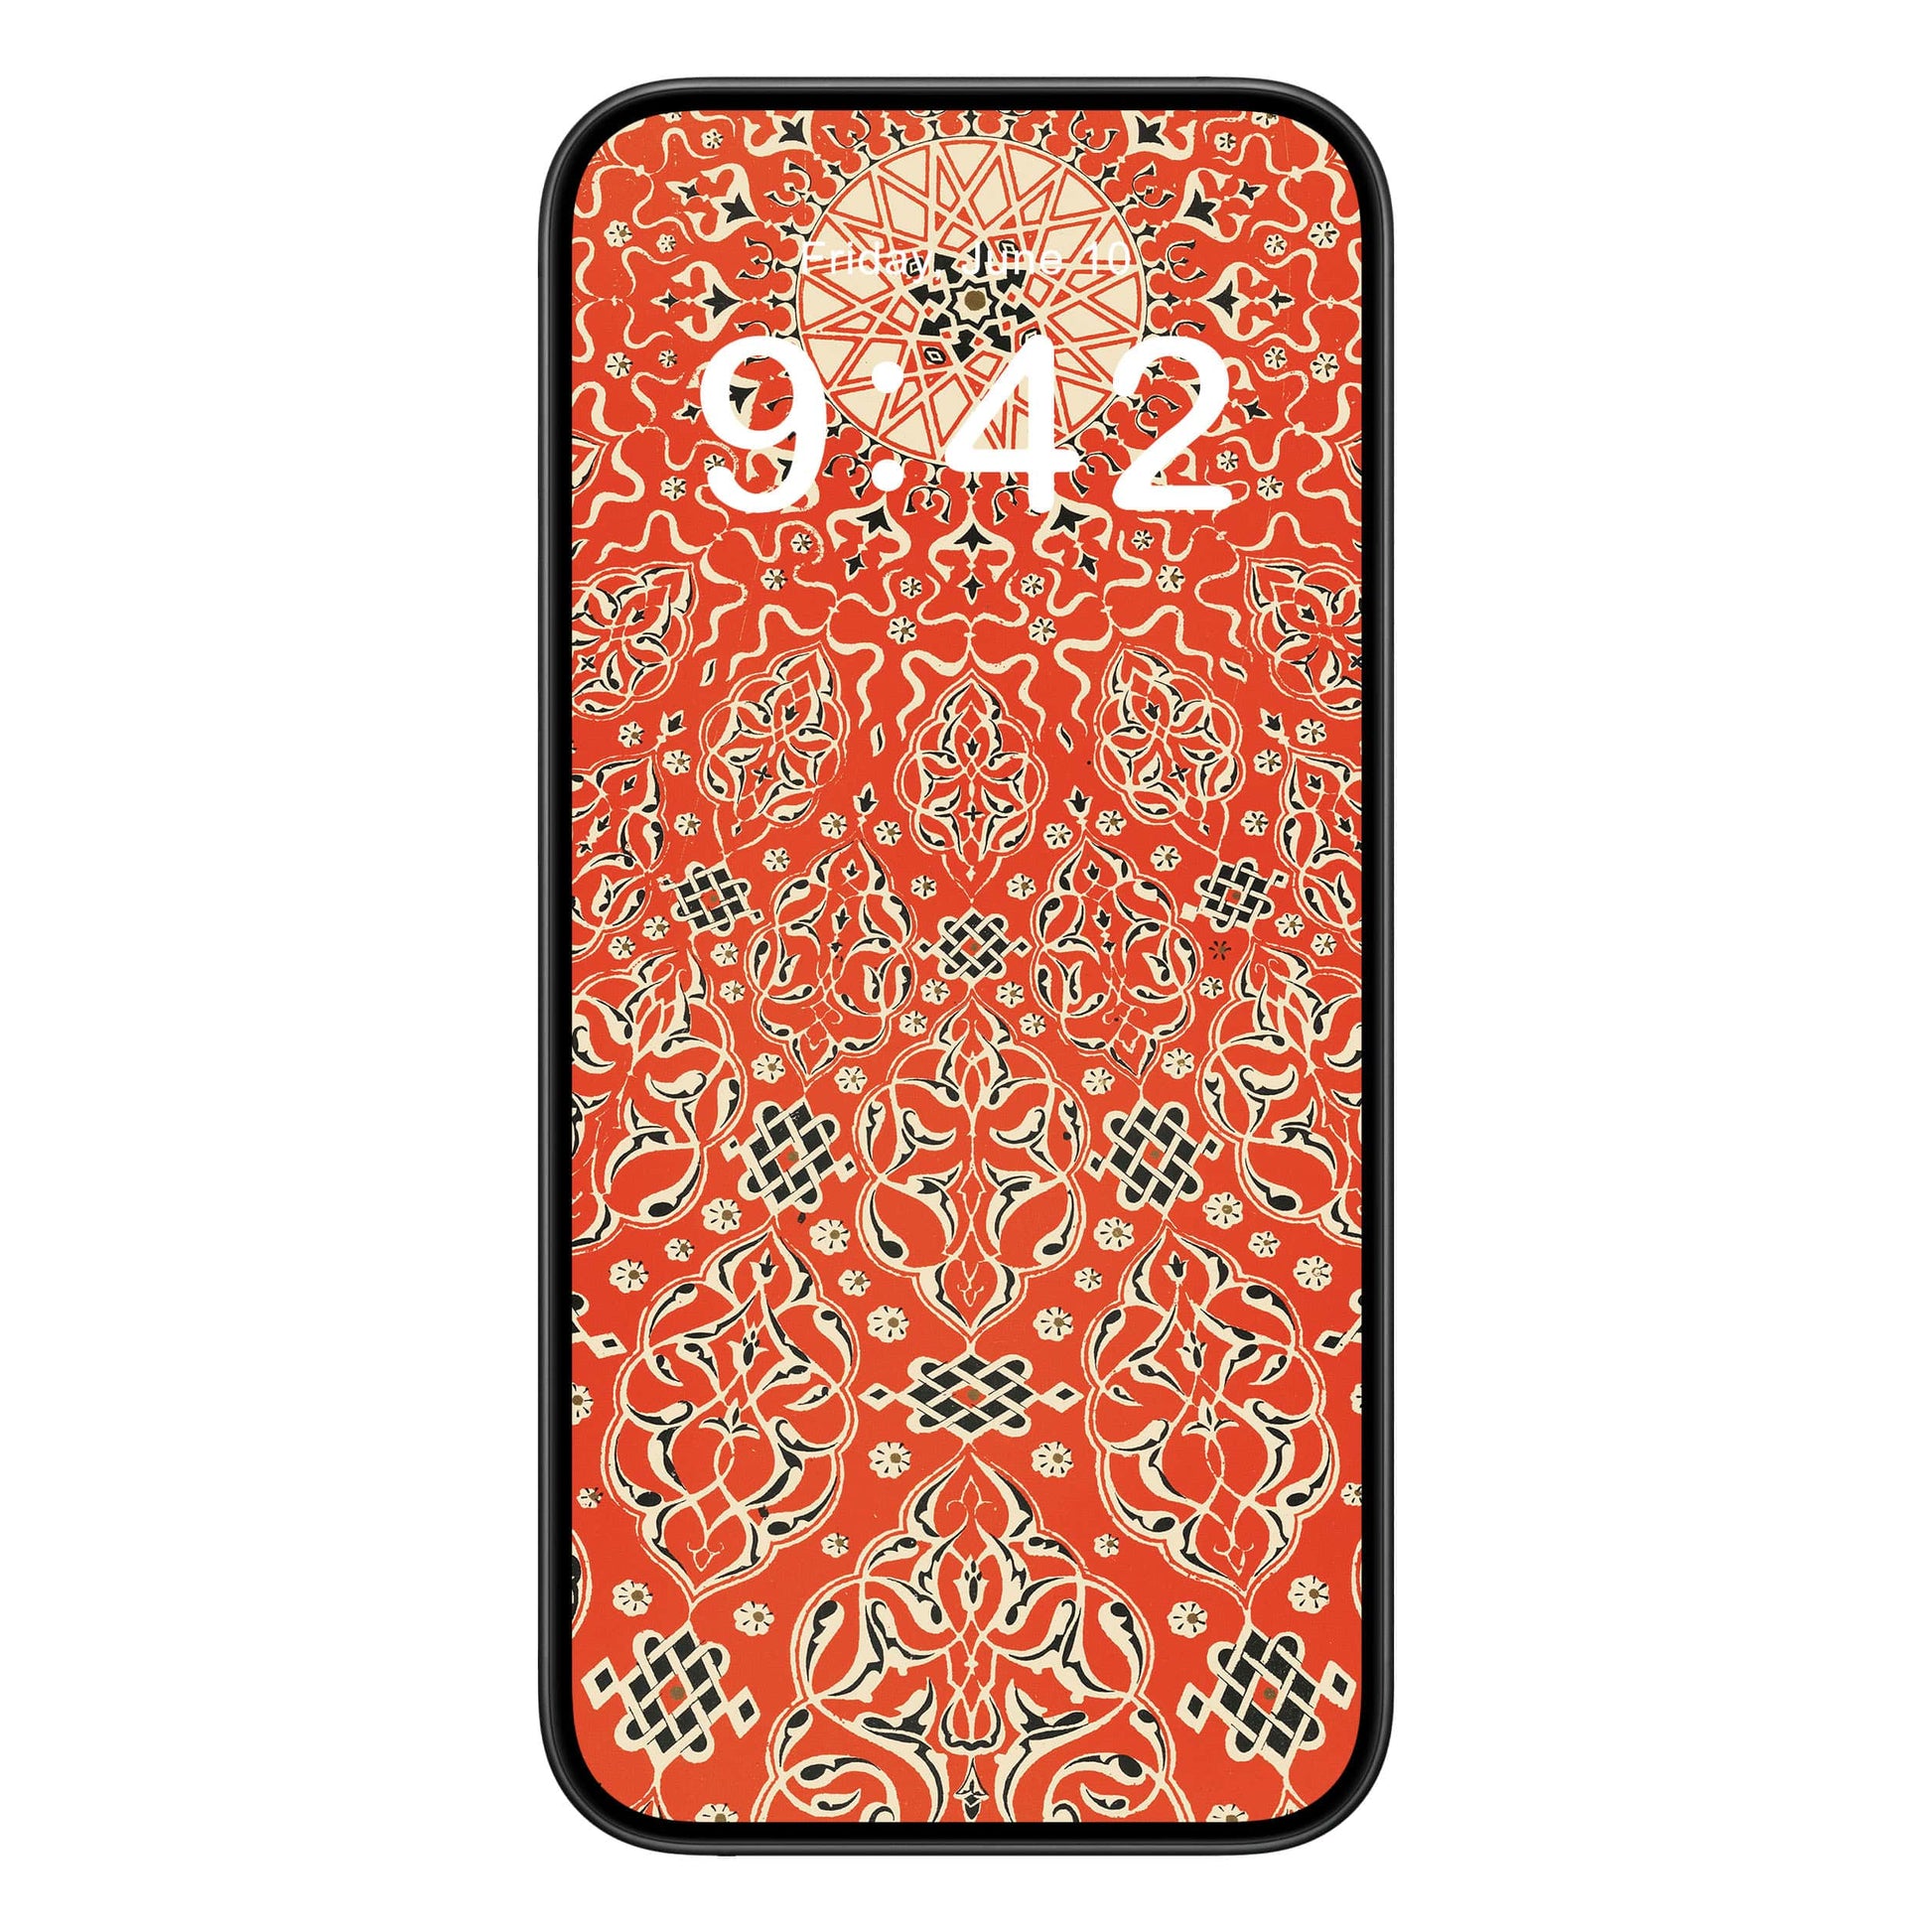 Bright Red Pattern phone wallpaper background with abstract turkish design shown on a phone lock screen, instant download available.